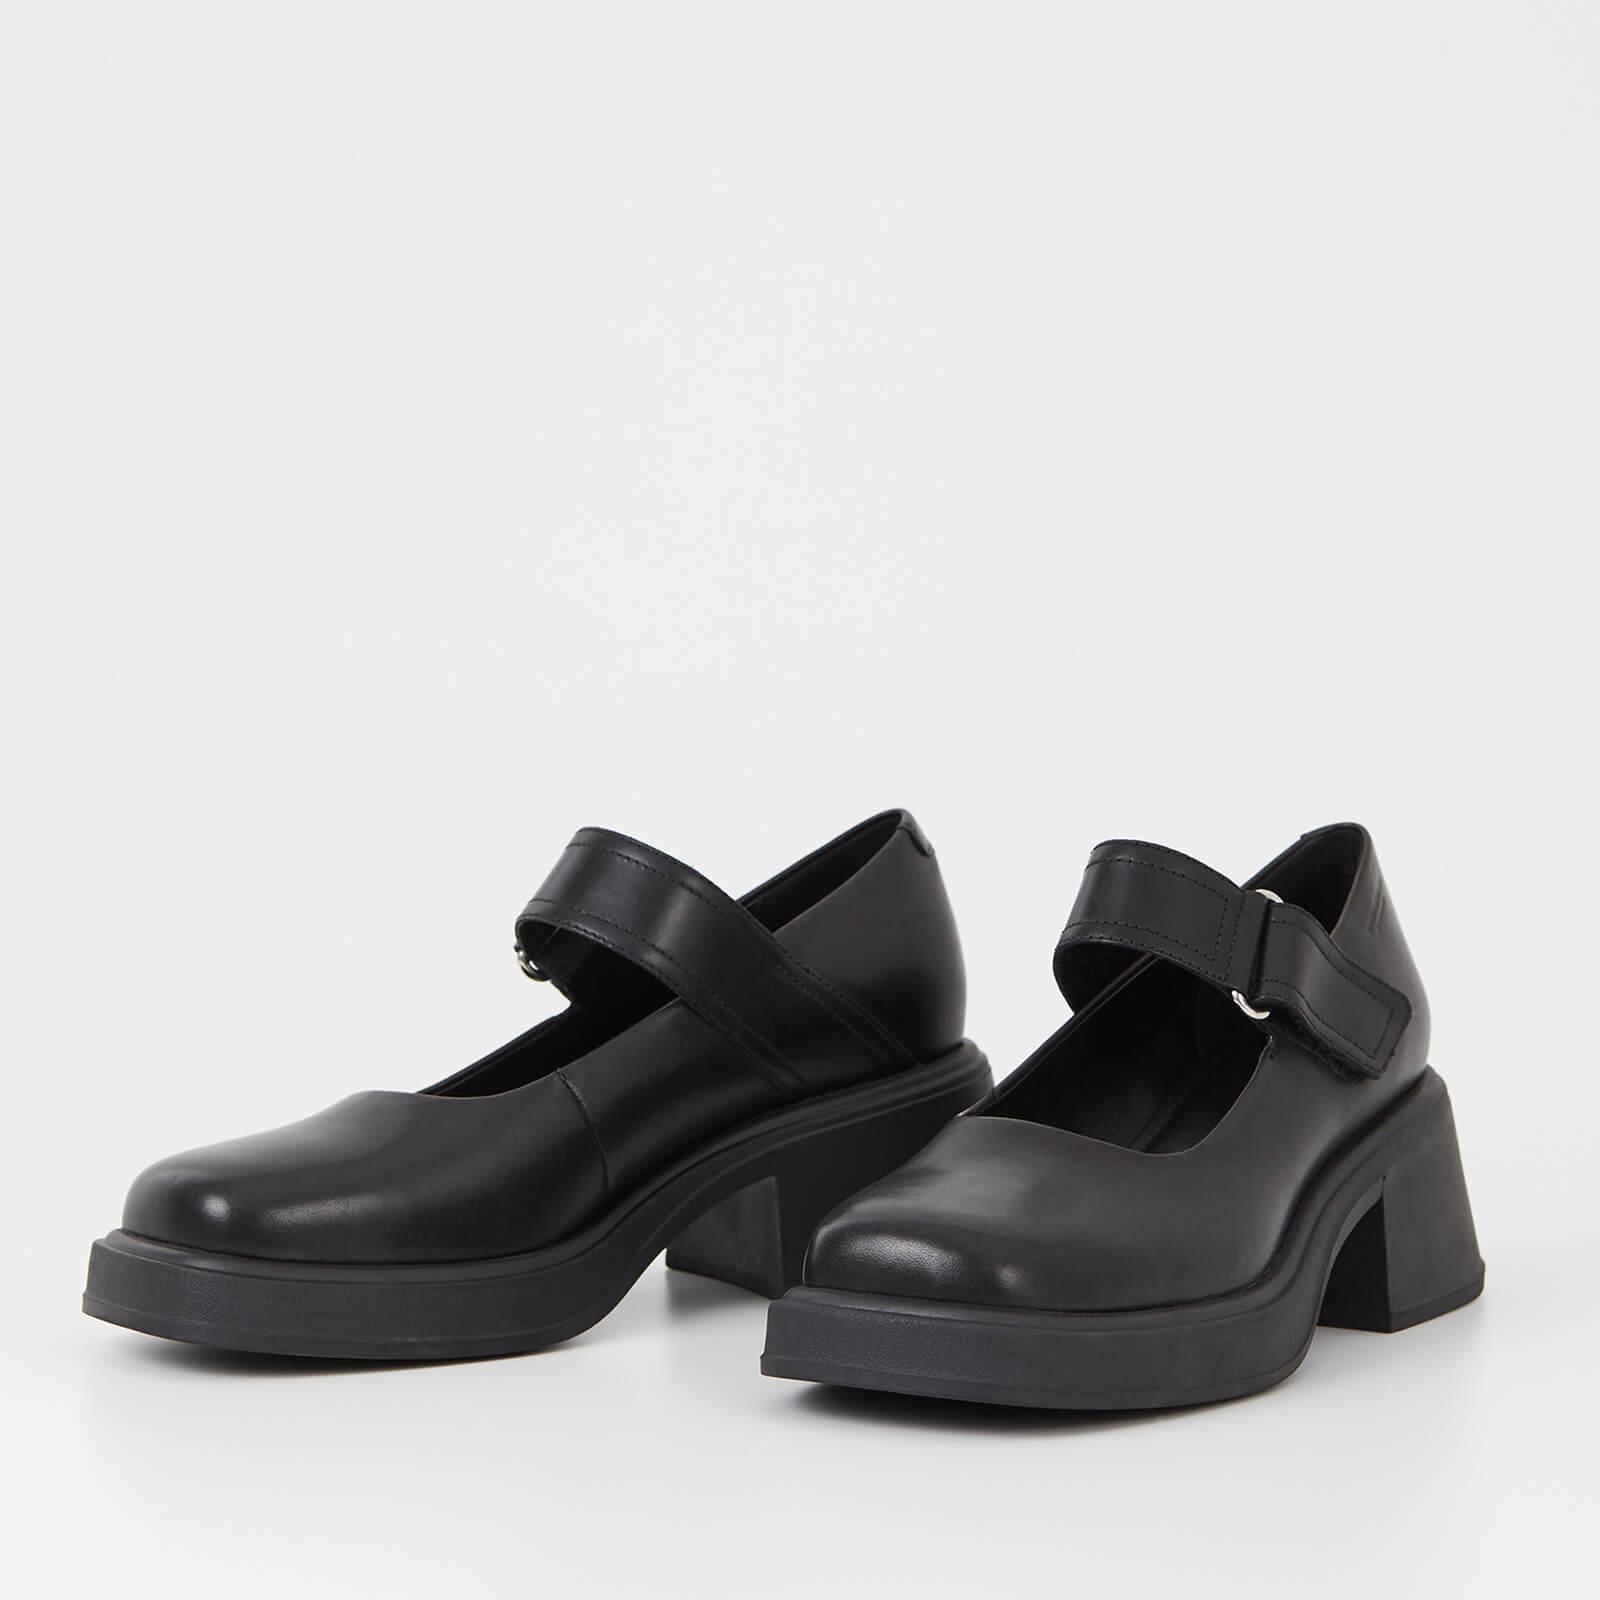 Vagabond Shoemakers Dorah Leather Heeled Mary Jane Shoes in Black | Lyst